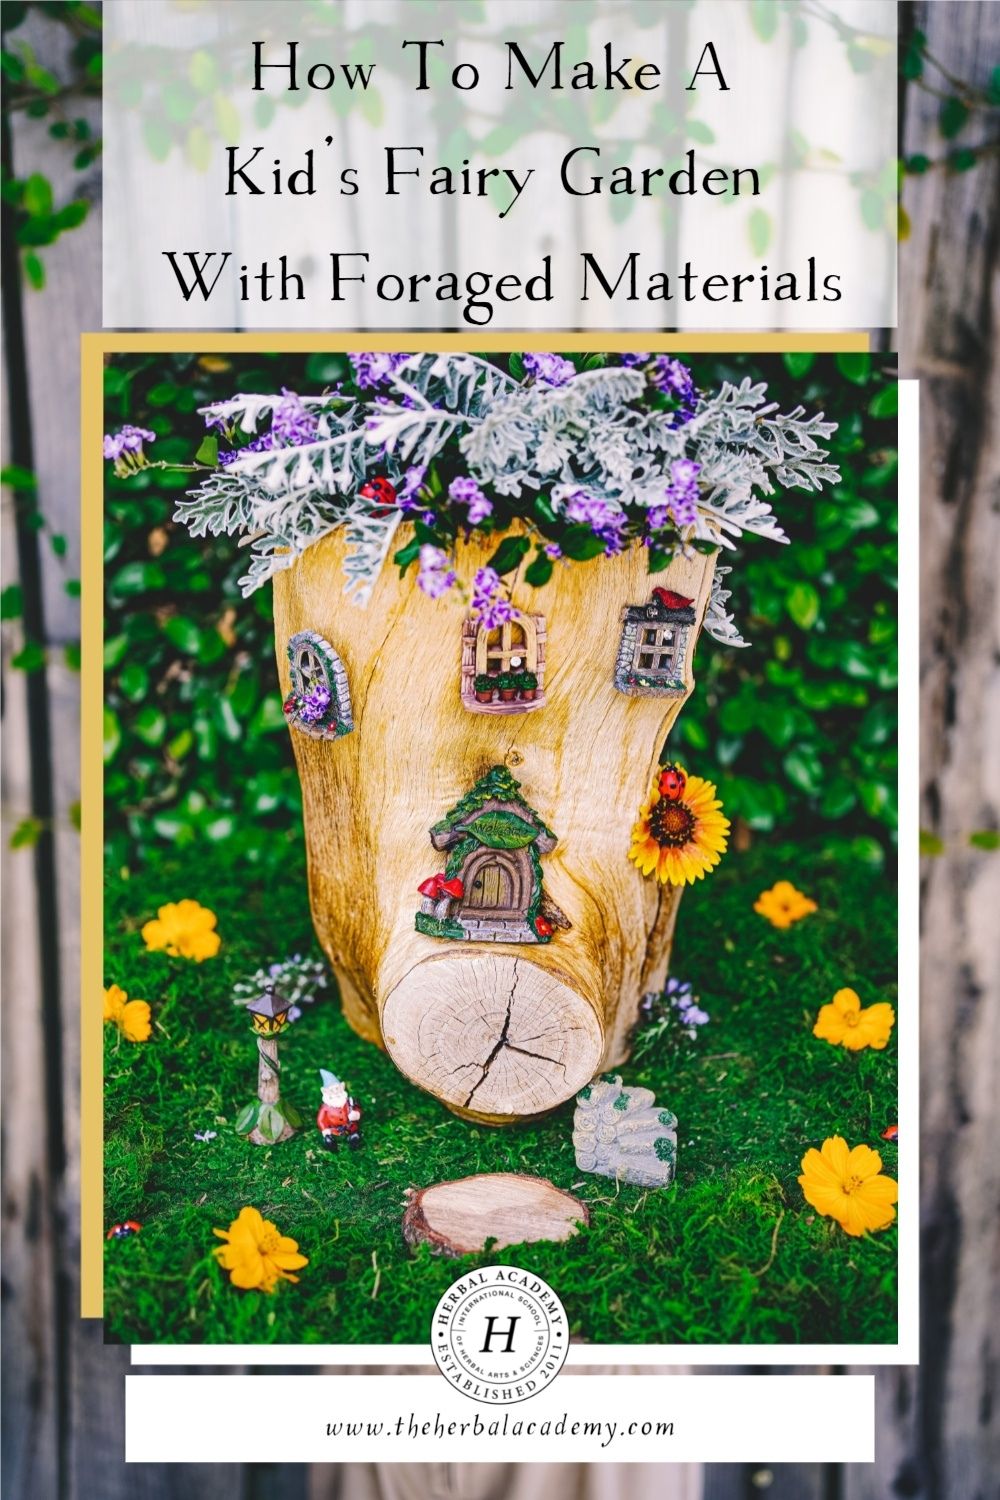 How To Make A Kid’s Fairy Garden With Foraged Materials | Herbal Academy | In this post, we share how to create a fairy garden with foraged materials and a dash of store-bought extras.